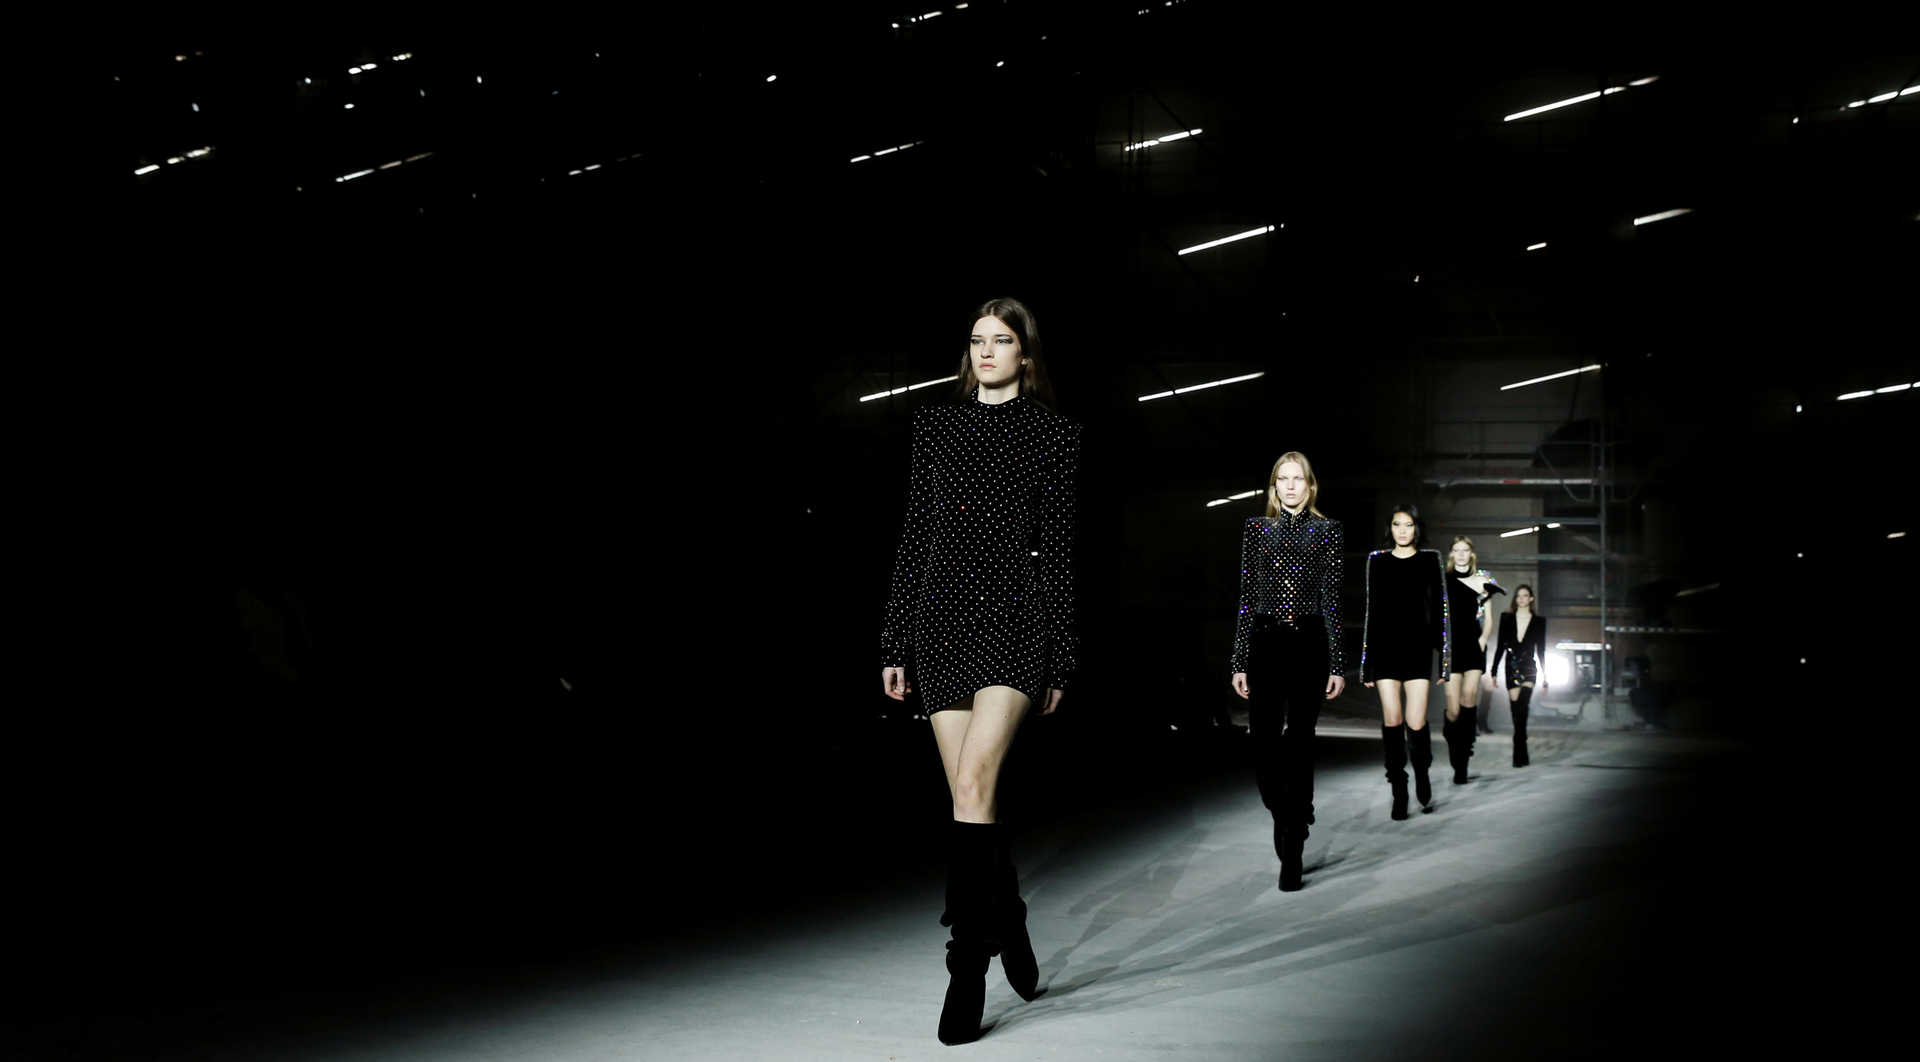 Models present creations by designer Anthony Vaccarello as part of his Autumn/Winter 2017/18 women’s ready-to-wear collection for fashion house Saint Laurent during Fashion Week in Paris